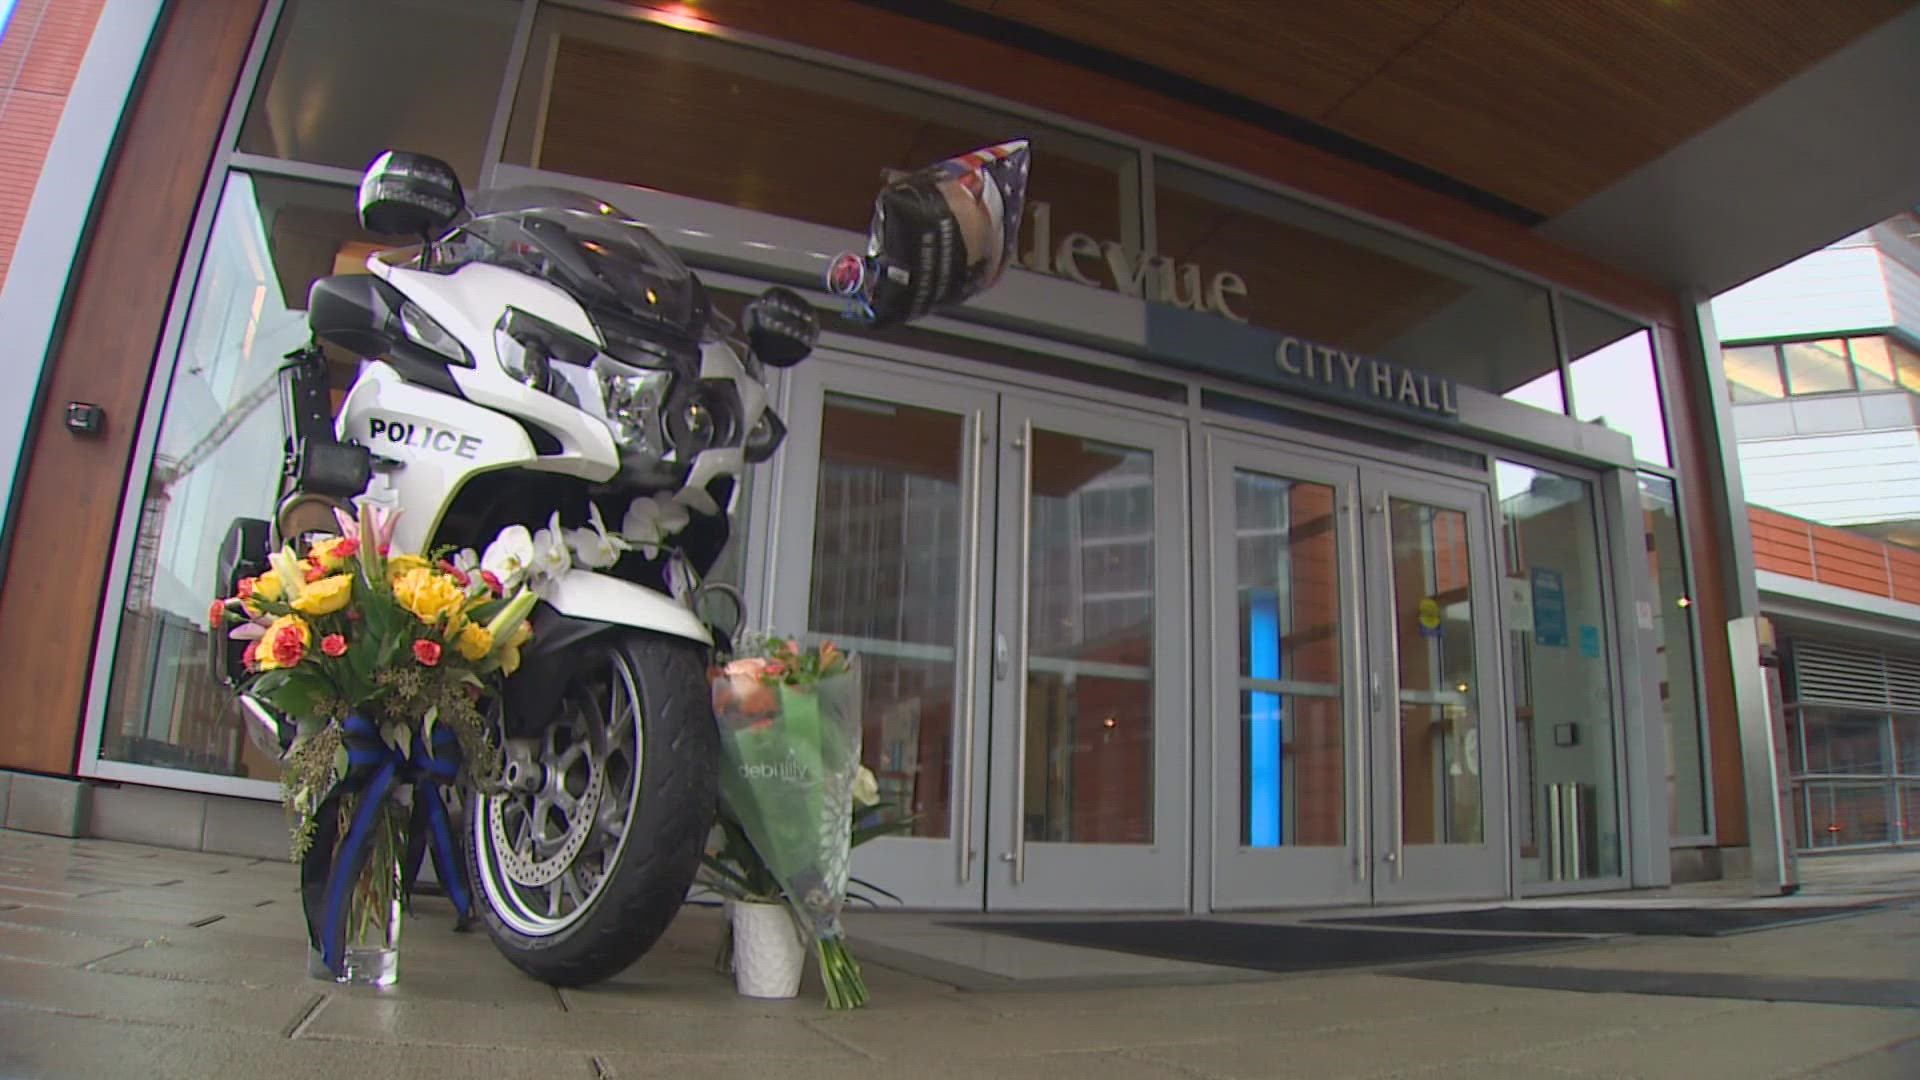 Jackson died on Monday after his motorcycle collided with a car in Bellevue. He was 34 years old.